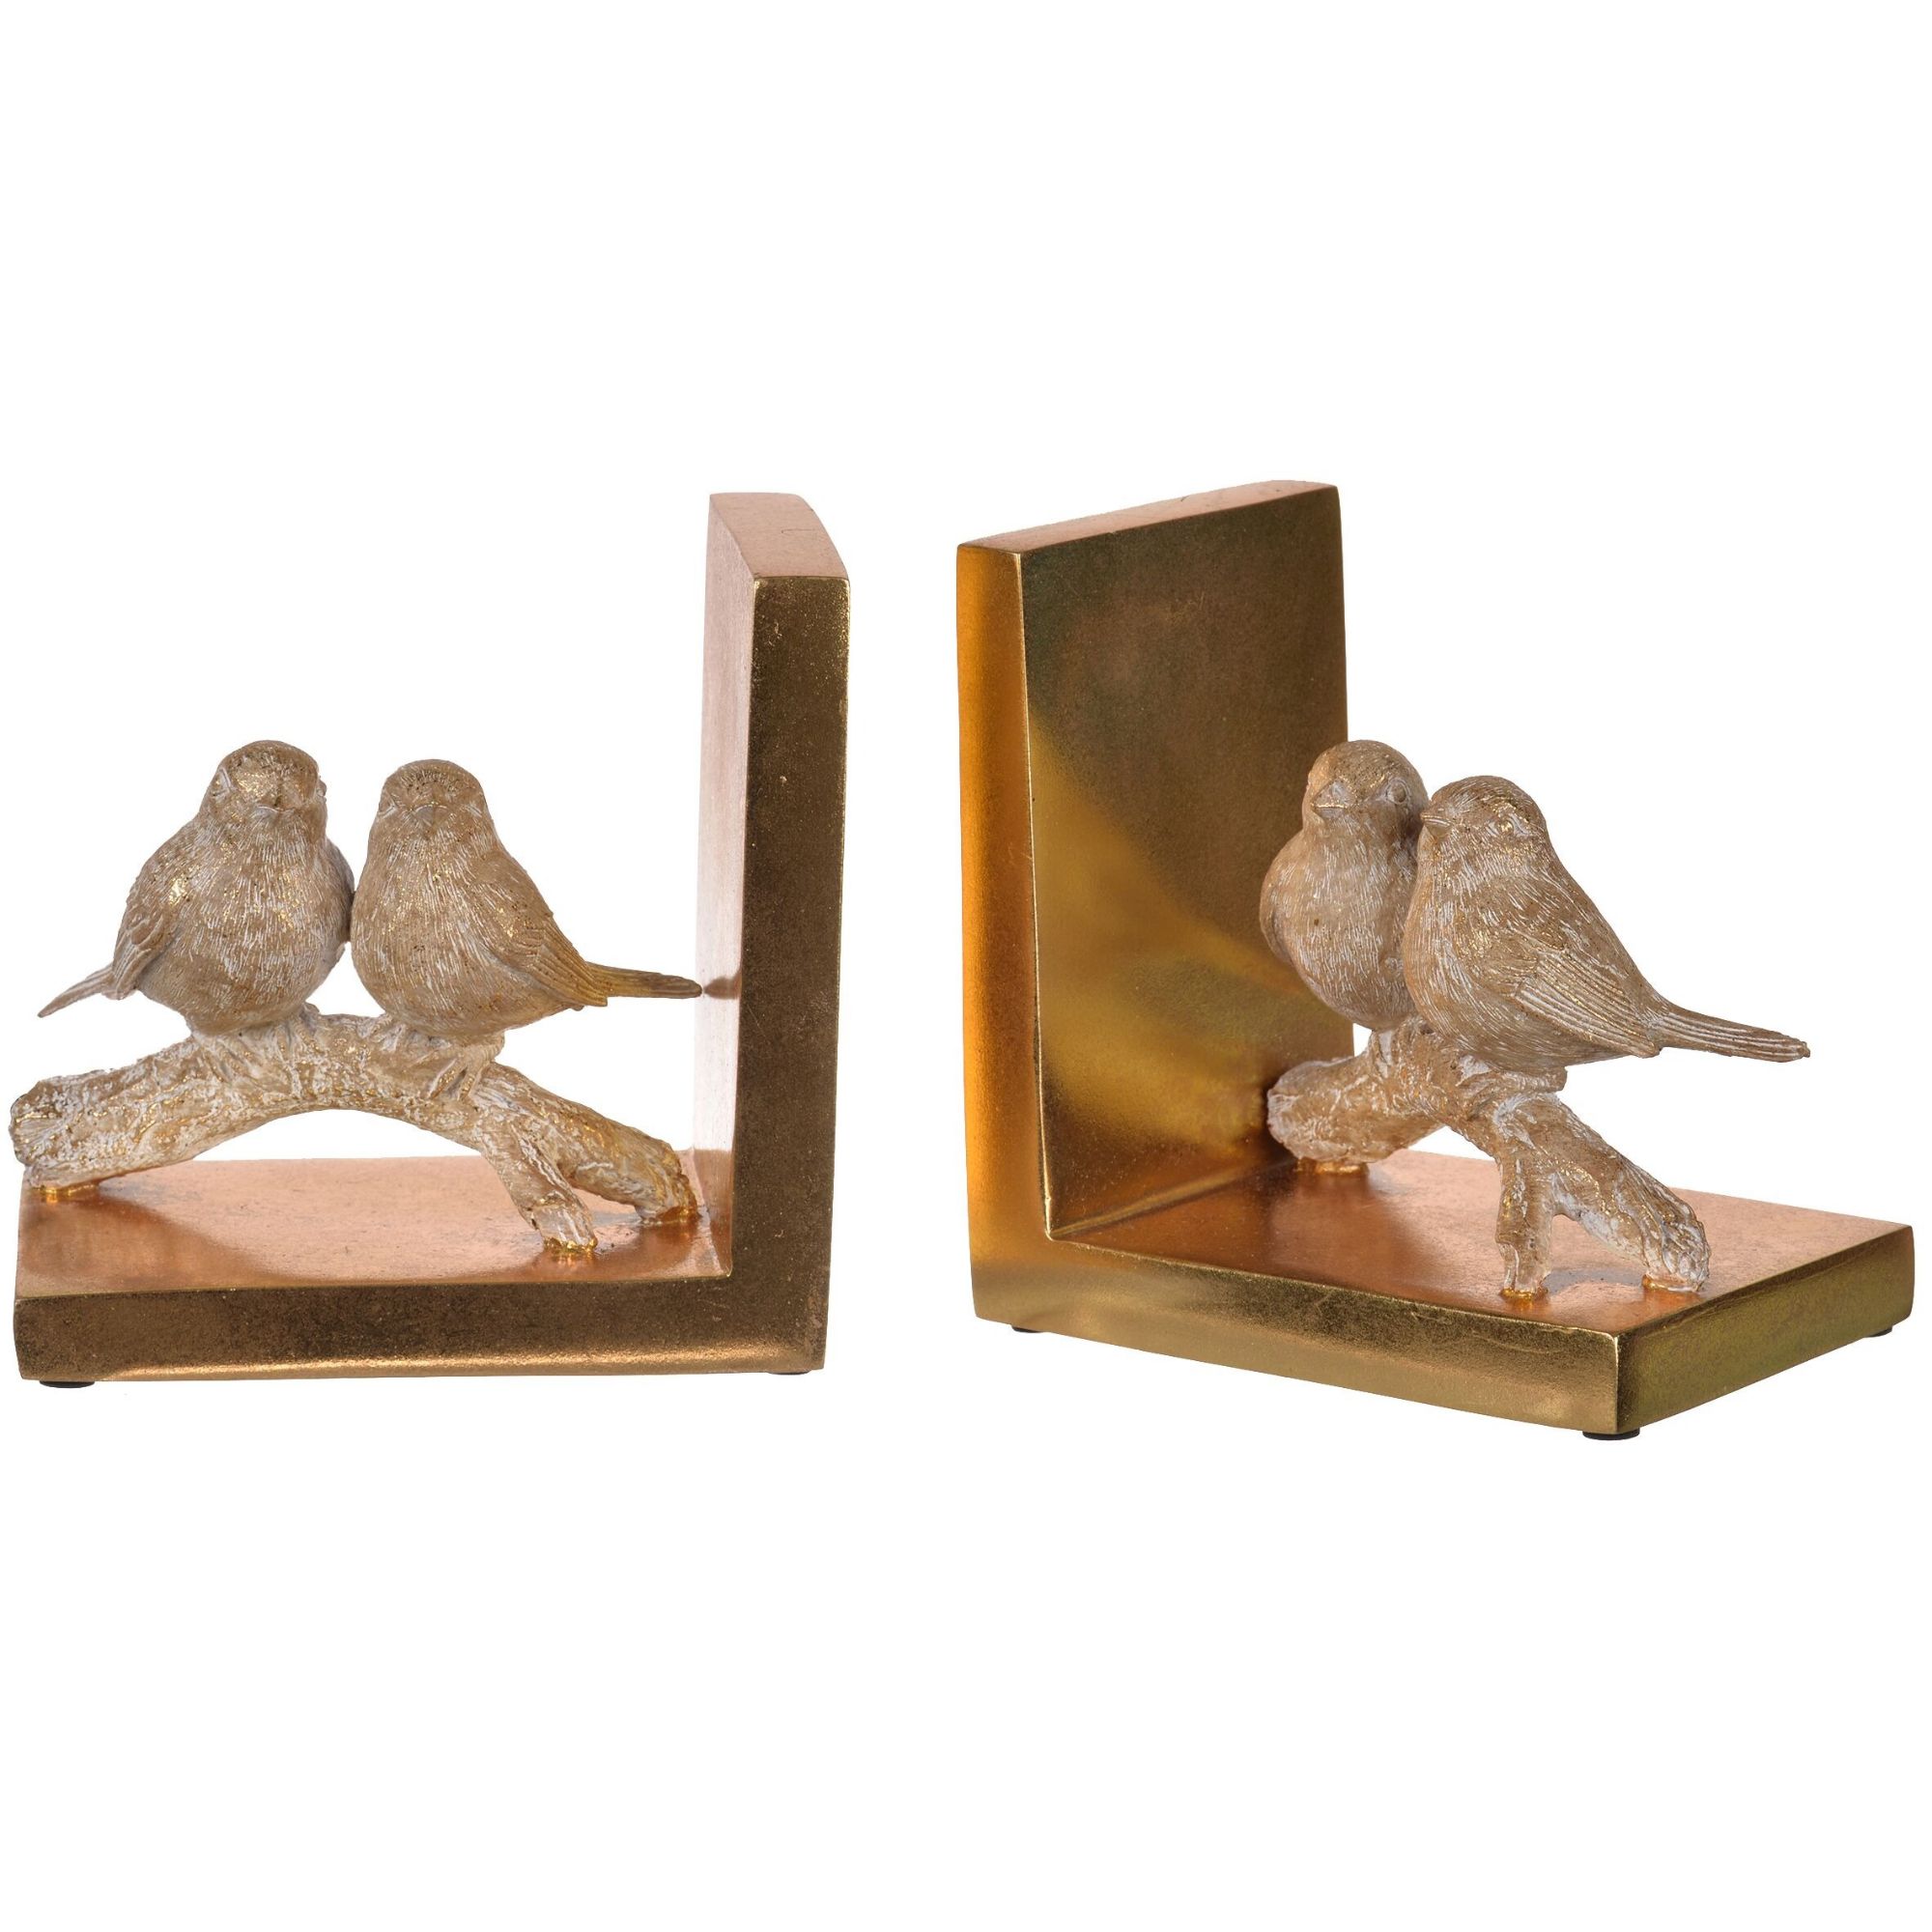 A&B Home Set of 2 Gold and Beige Gold Duchess Bookends 11.8"